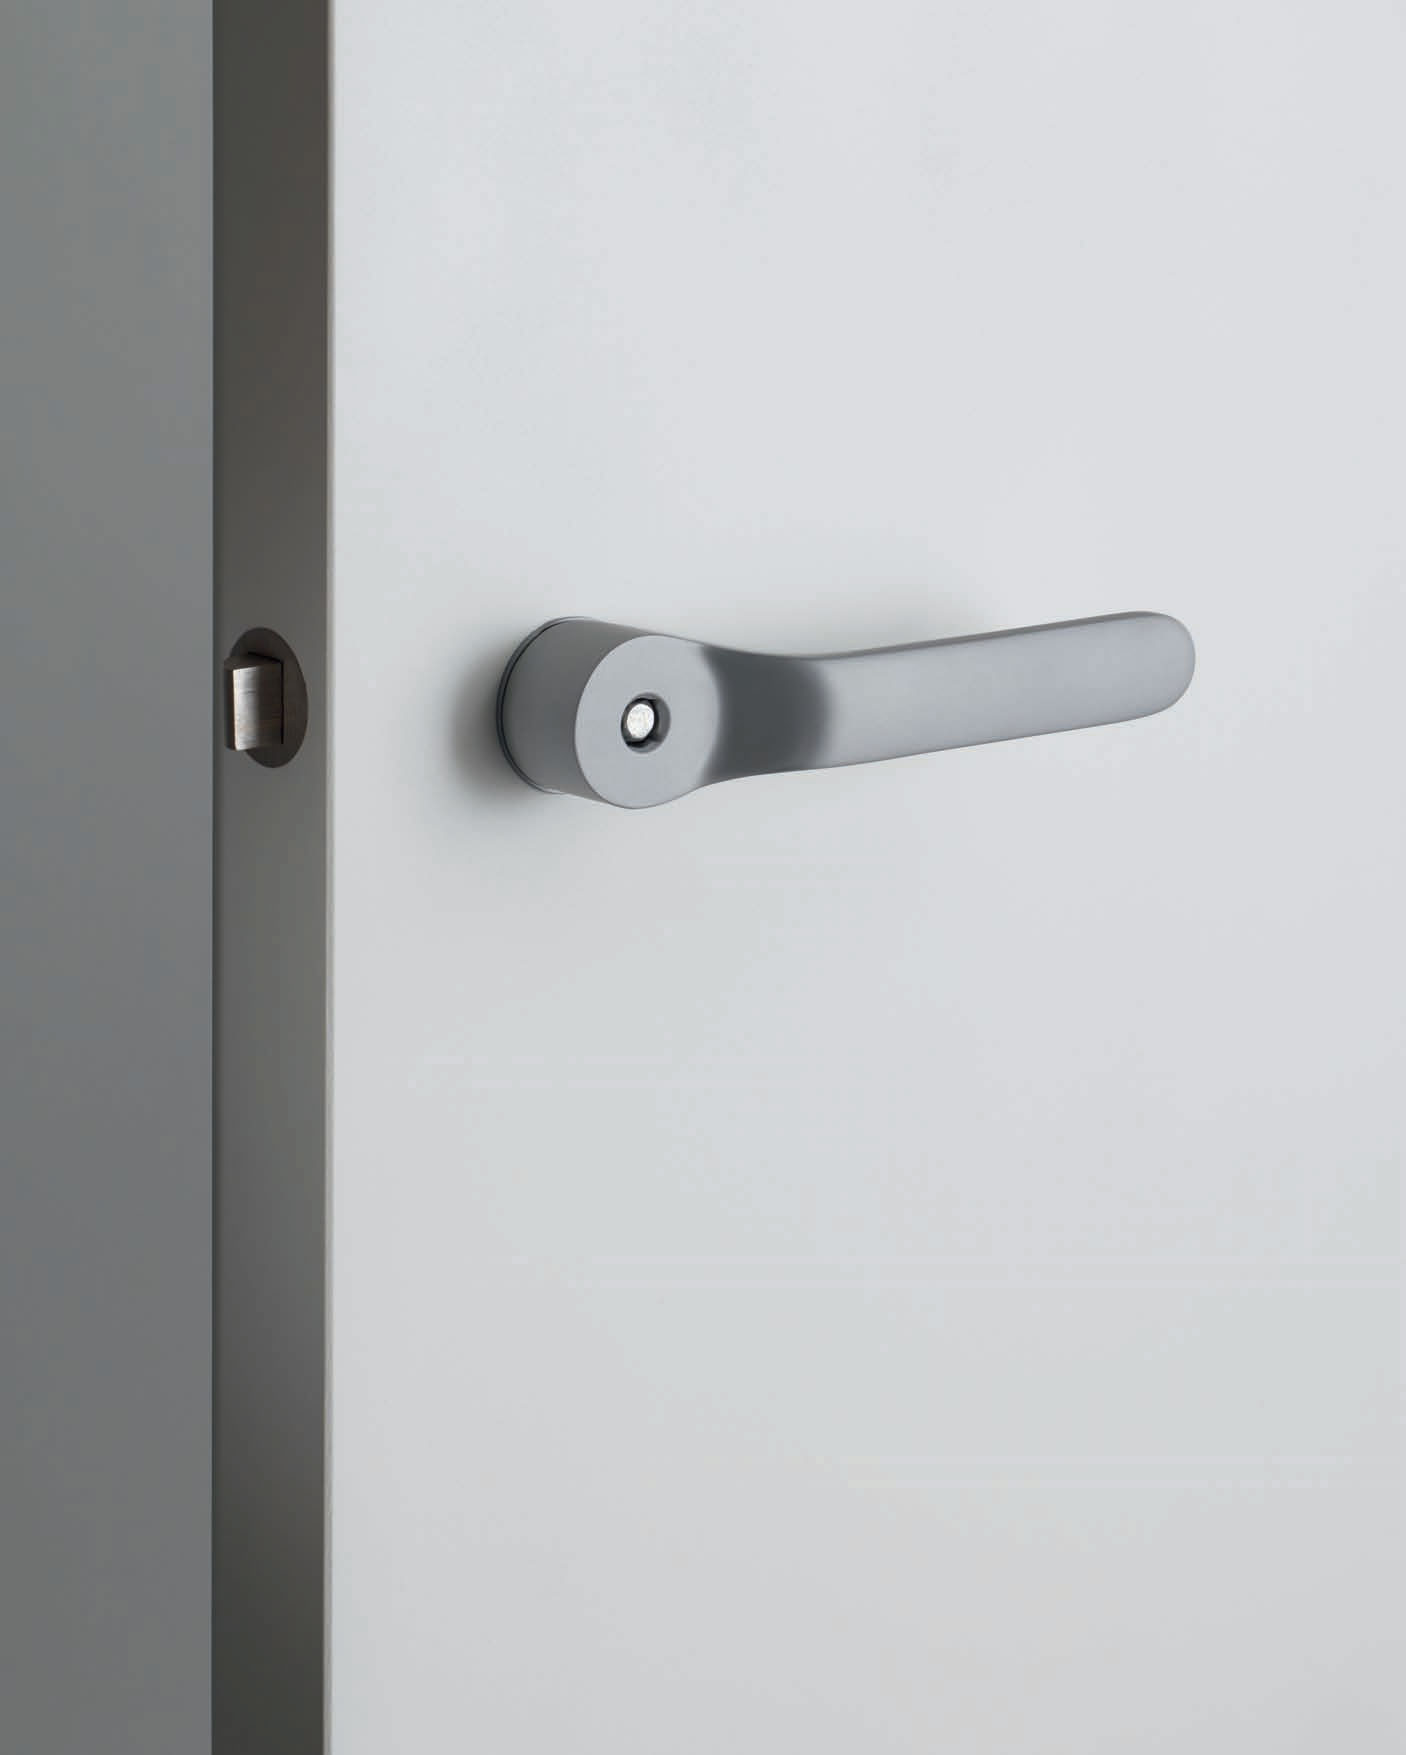 Door Tool, 2001, by Industrial Facility. From our new book Industrial Facility
